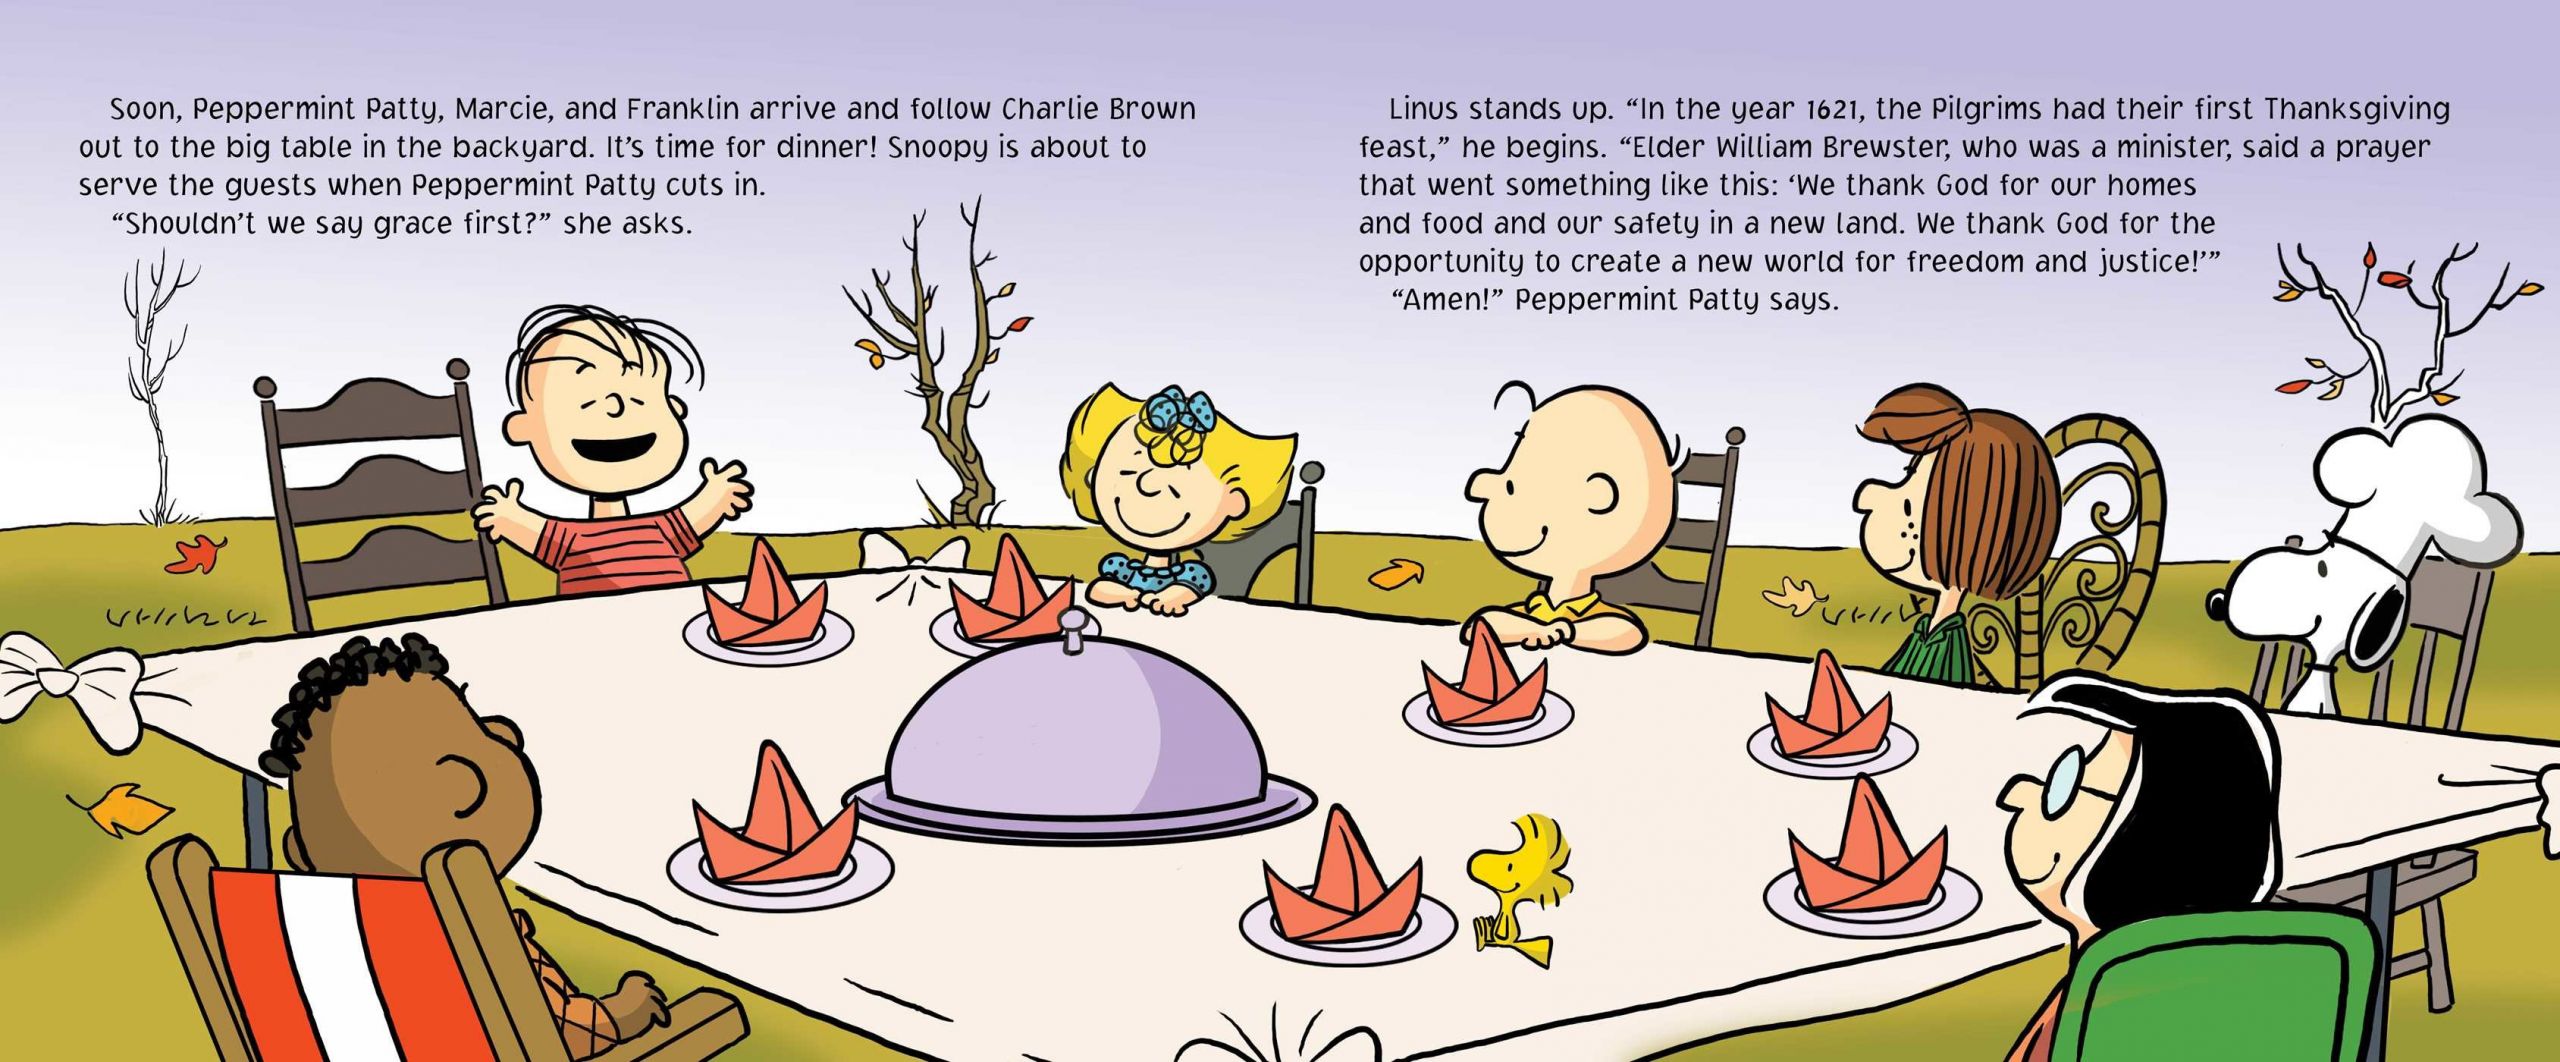 Charlie Brown Thanksgiving Table
 A Charlie Brown Thanksgiving